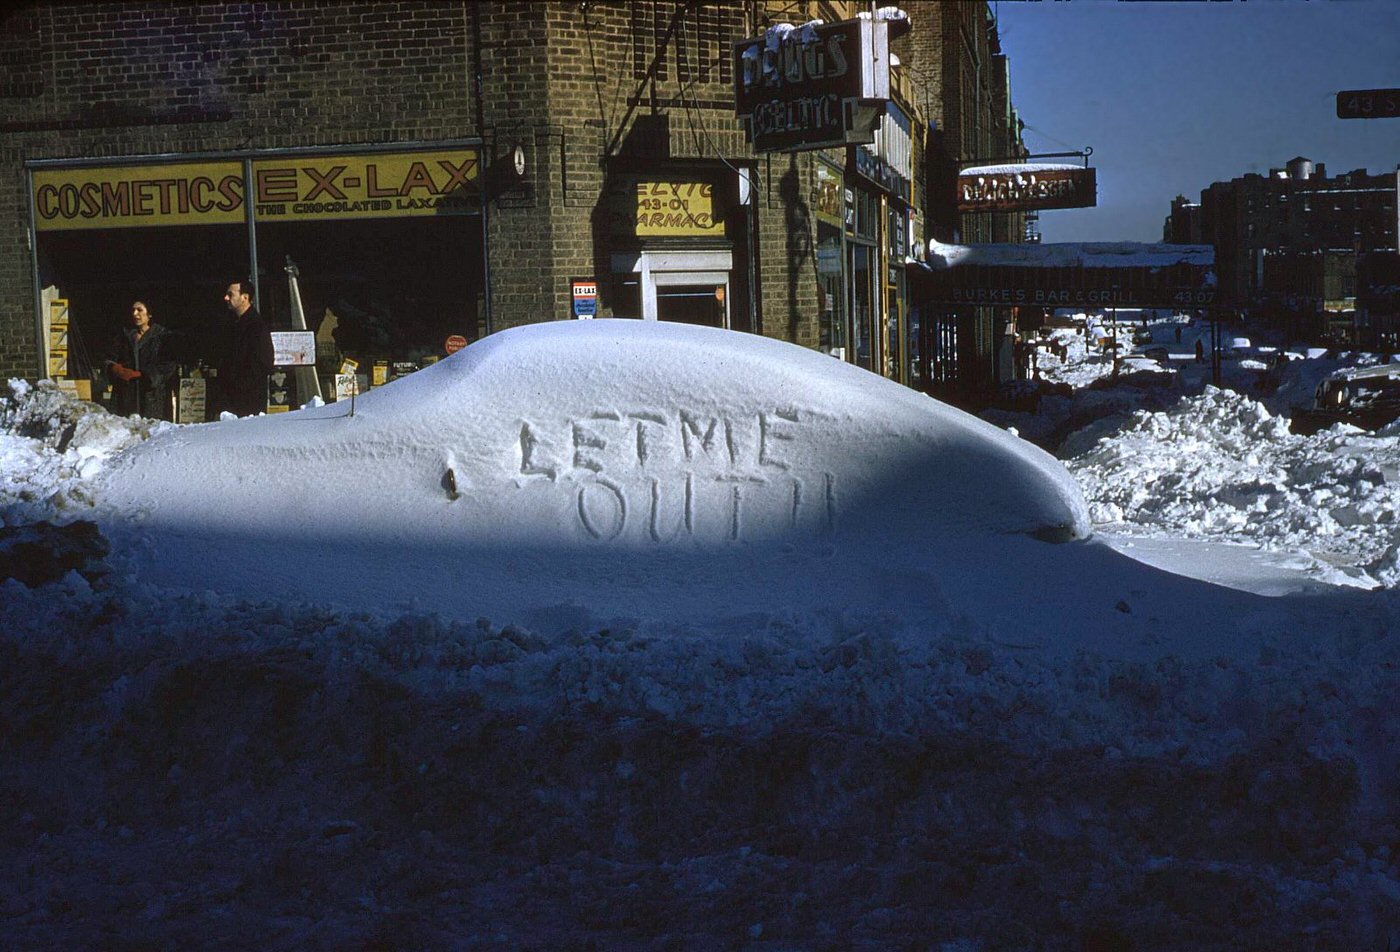 Queens NY Drug store and snow covered car, 1961